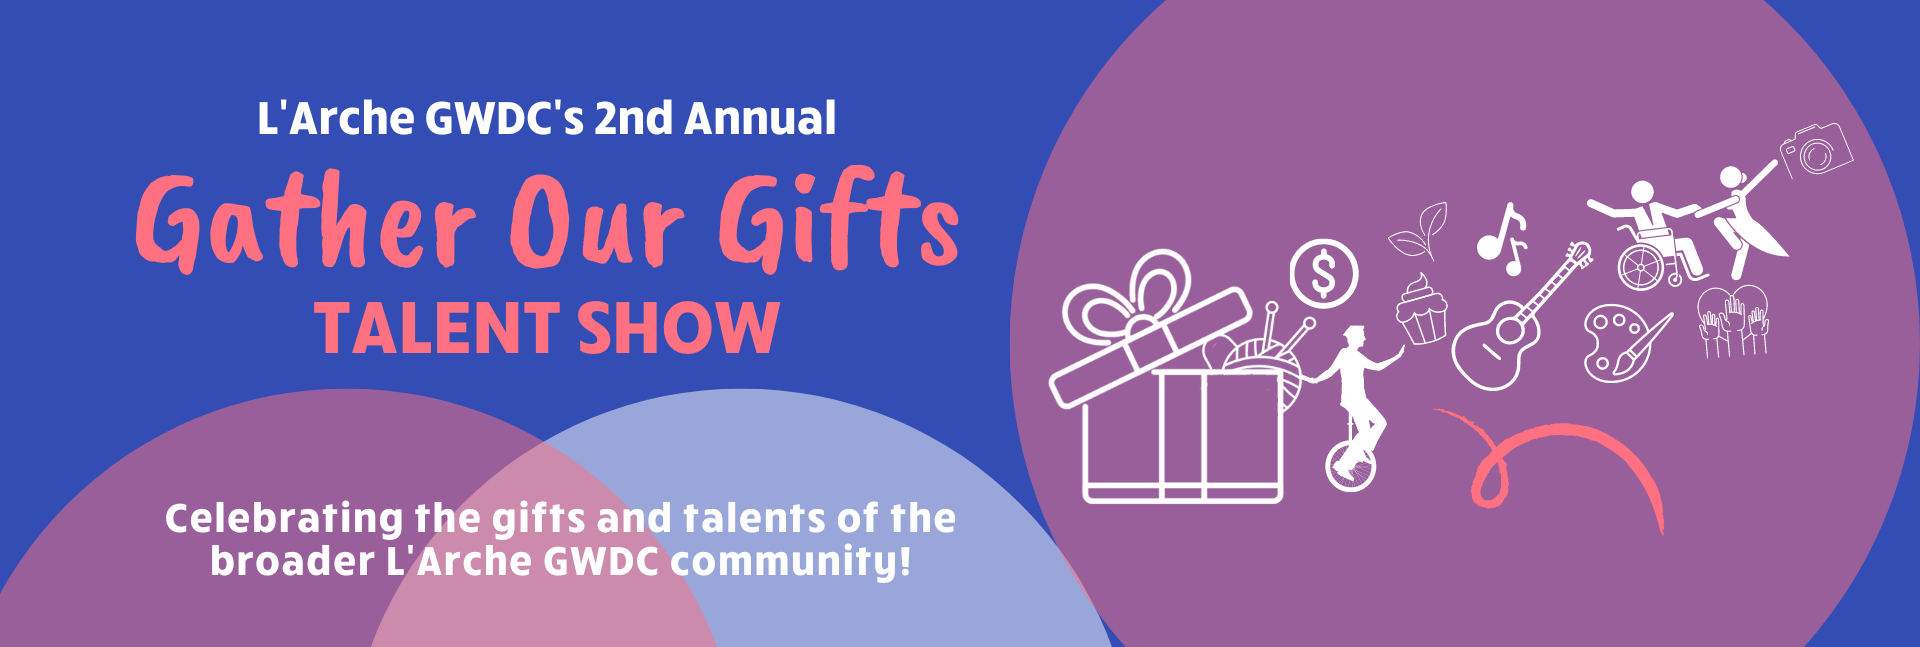 L'Arche GWDC's 2nd Annual "Gather Our Gifts" Friendraiser and Fundraiser. Celebrating the gifts and talents of the broader L'Arche GWDC community!